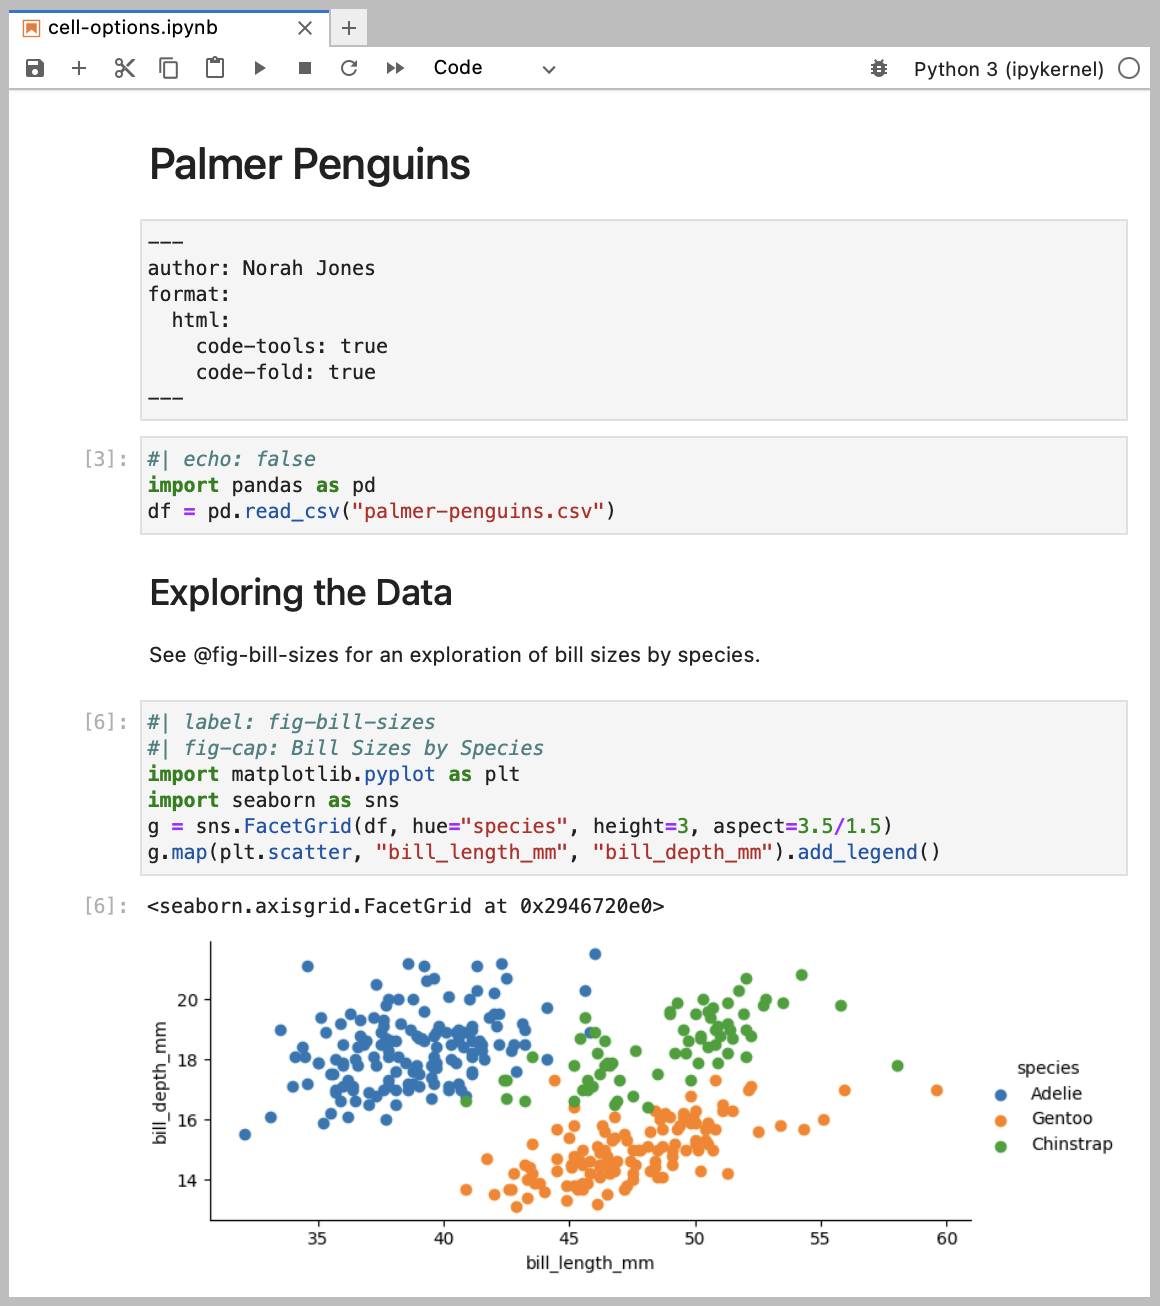 Interactive Python tutorial with code cells, text, and visualizations.